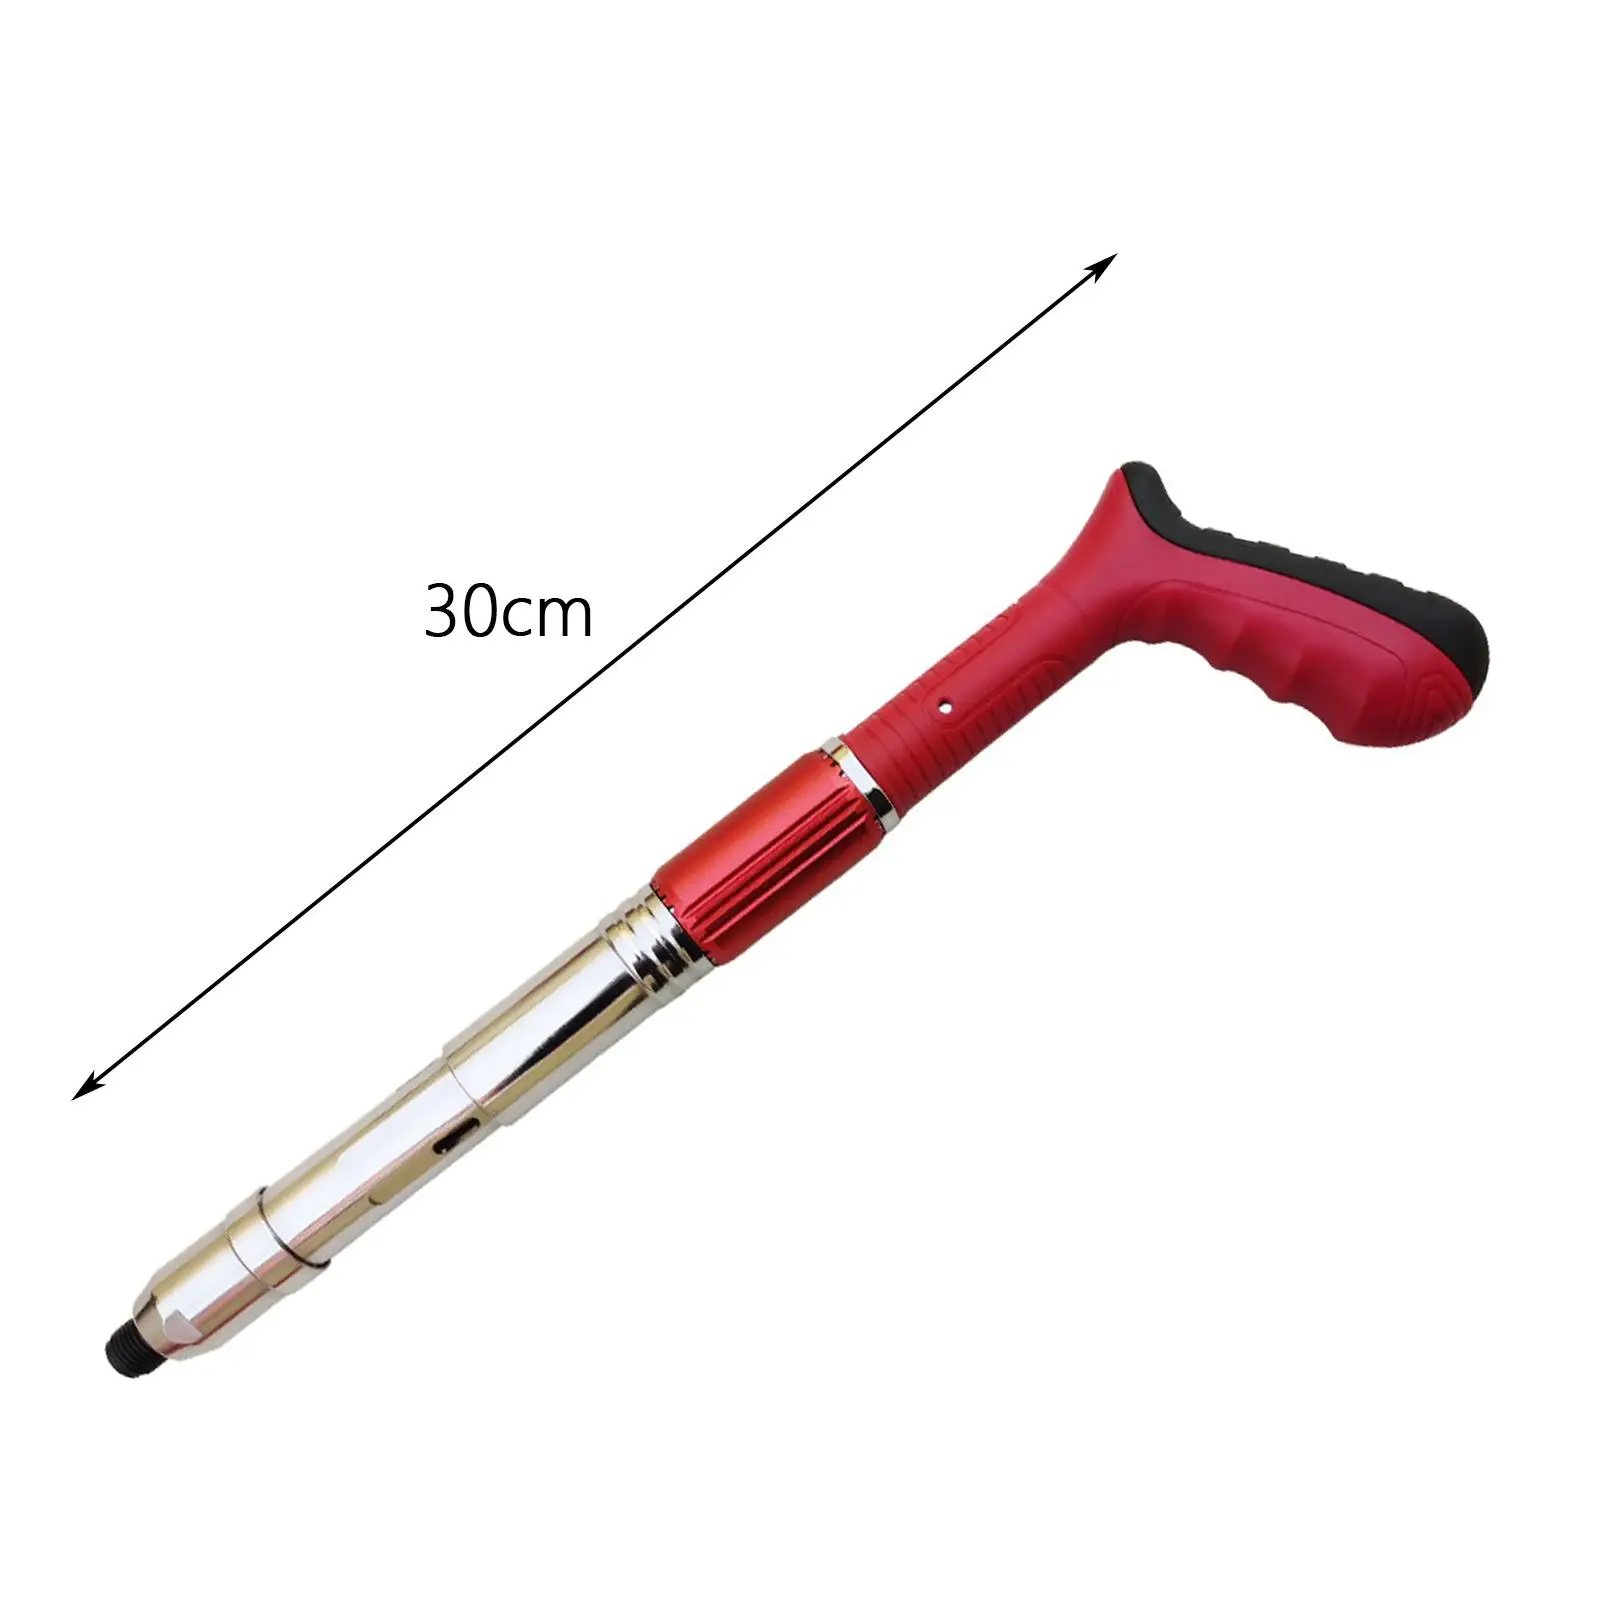 Nail Rivet Tool Wall Anchor Four Levels Adjusting Mute Portable Nails Machine for Wire Slotting Device Furniture Decoration